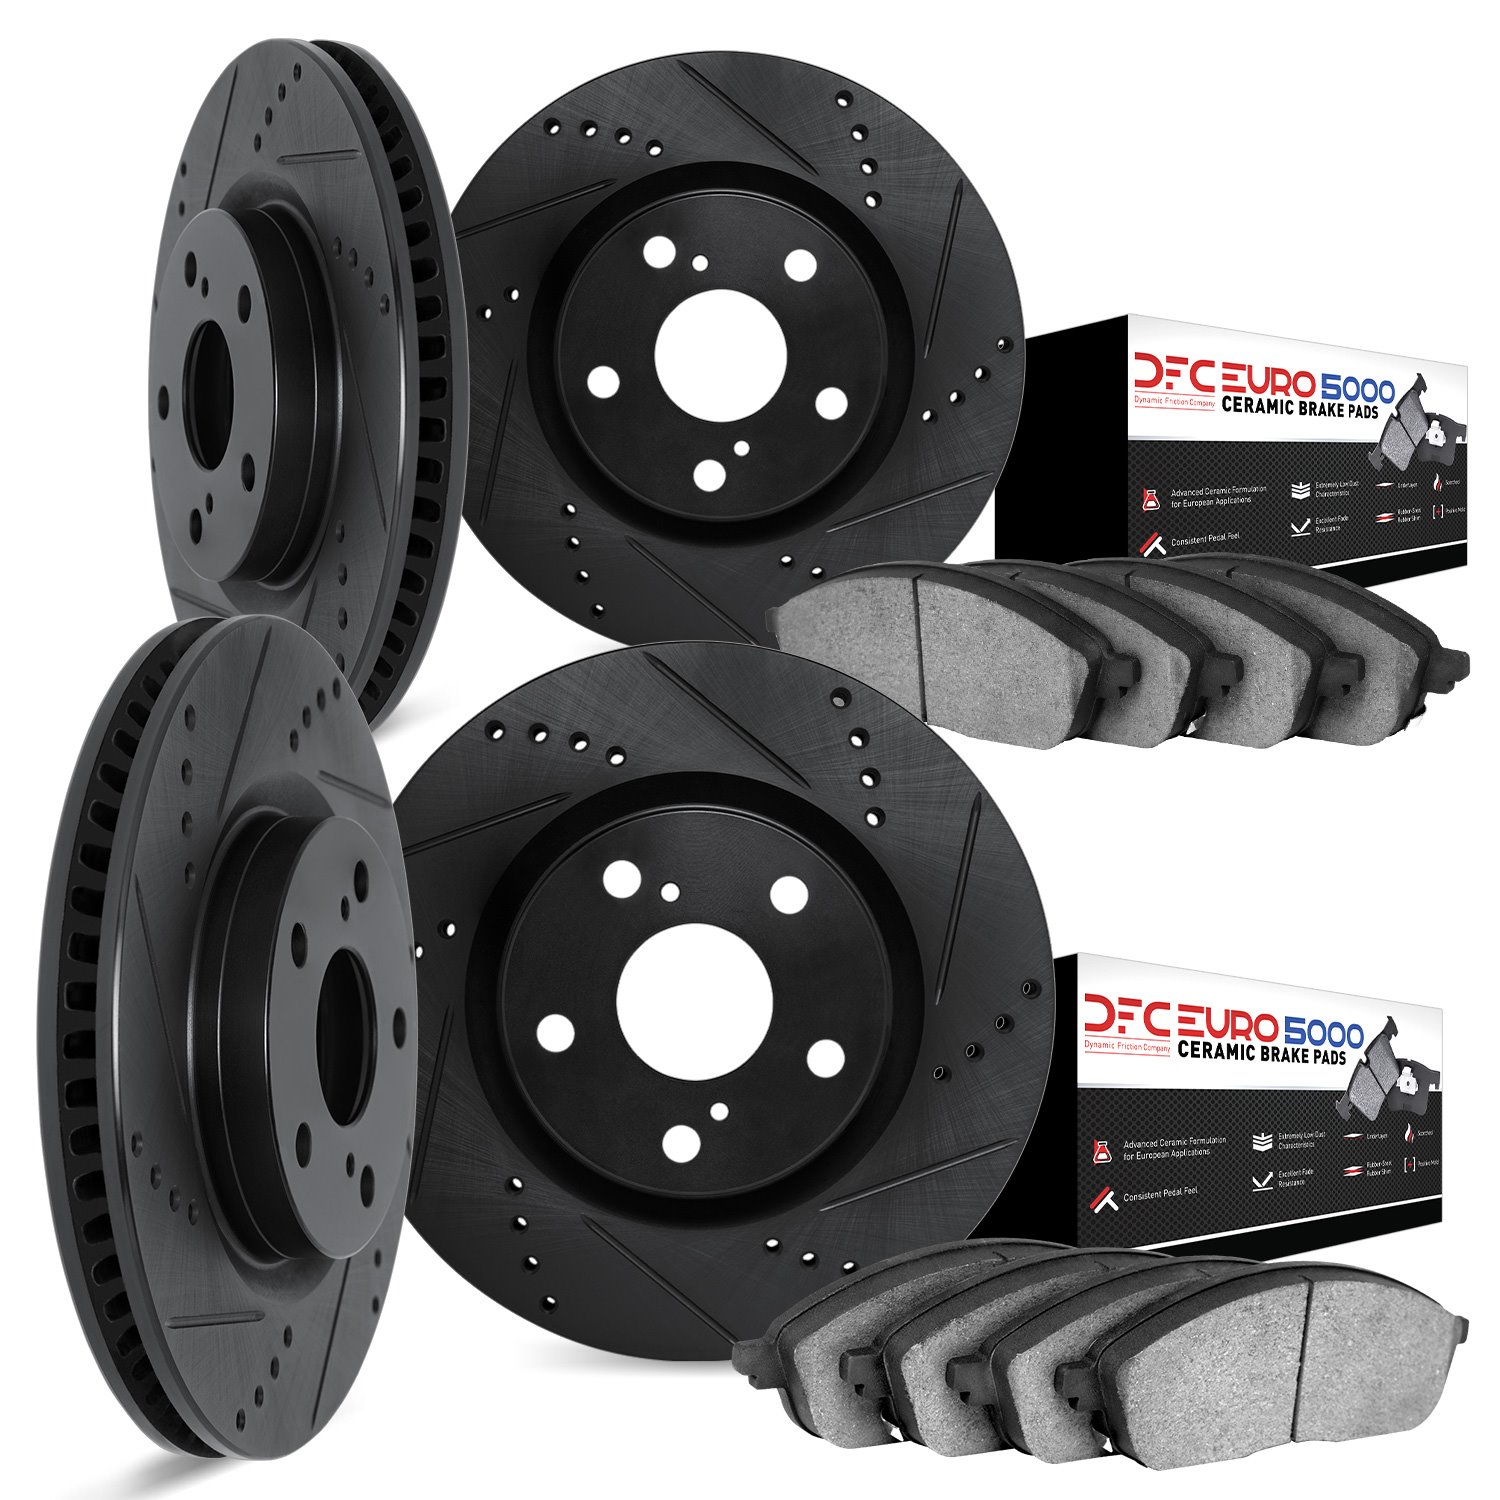 8604-63016 Drilled/Slotted Brake Rotors w/5000 Euro Ceramic Brake Pads Kit [Black], 2018-2019 Mercedes-Benz, Position: Front and